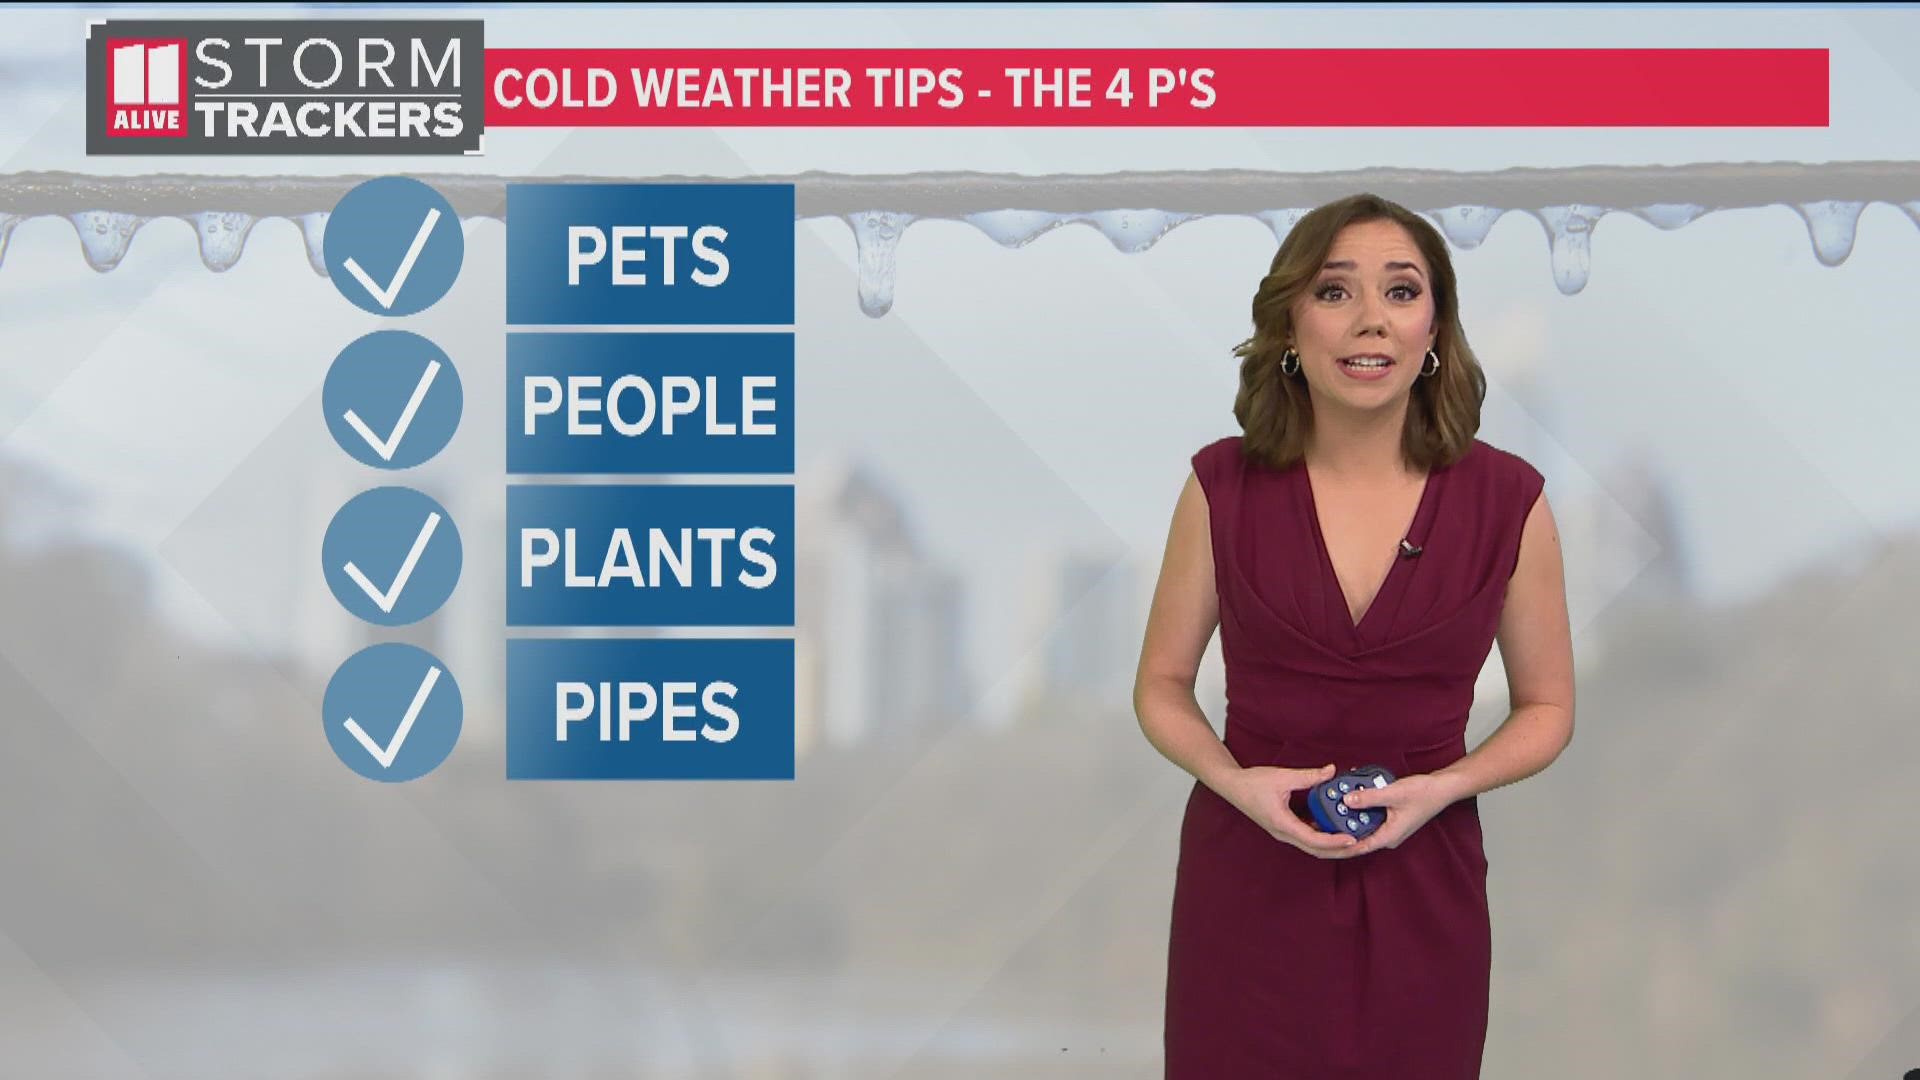 How to prepare your pipes for the cold air